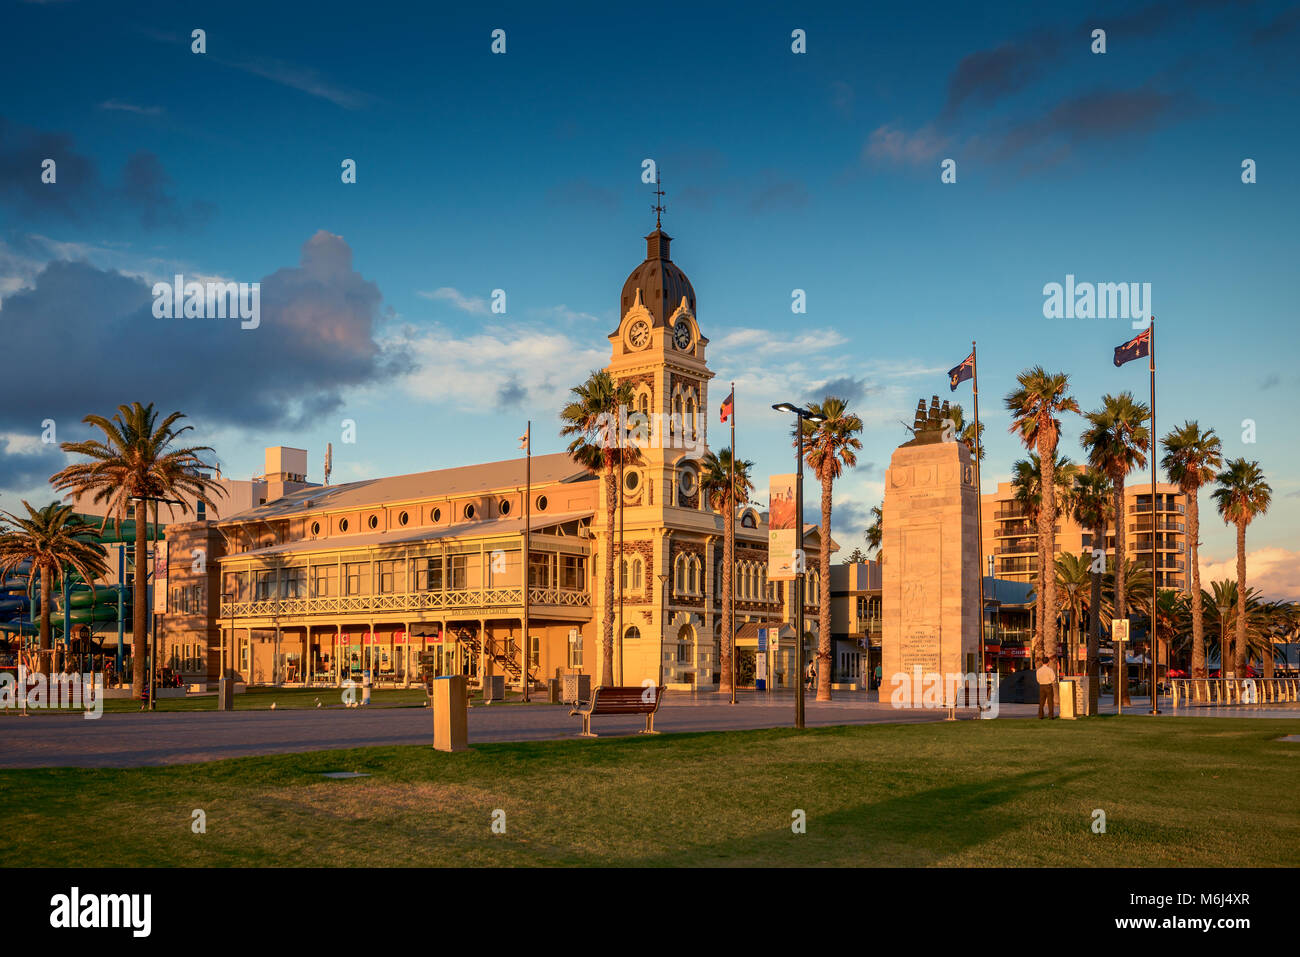 Adelaide, Australia - February 25, 2016: Glenelg Town Hall with Pioneer Memorial viewed through Moseley Square at sunset. Stock Photo